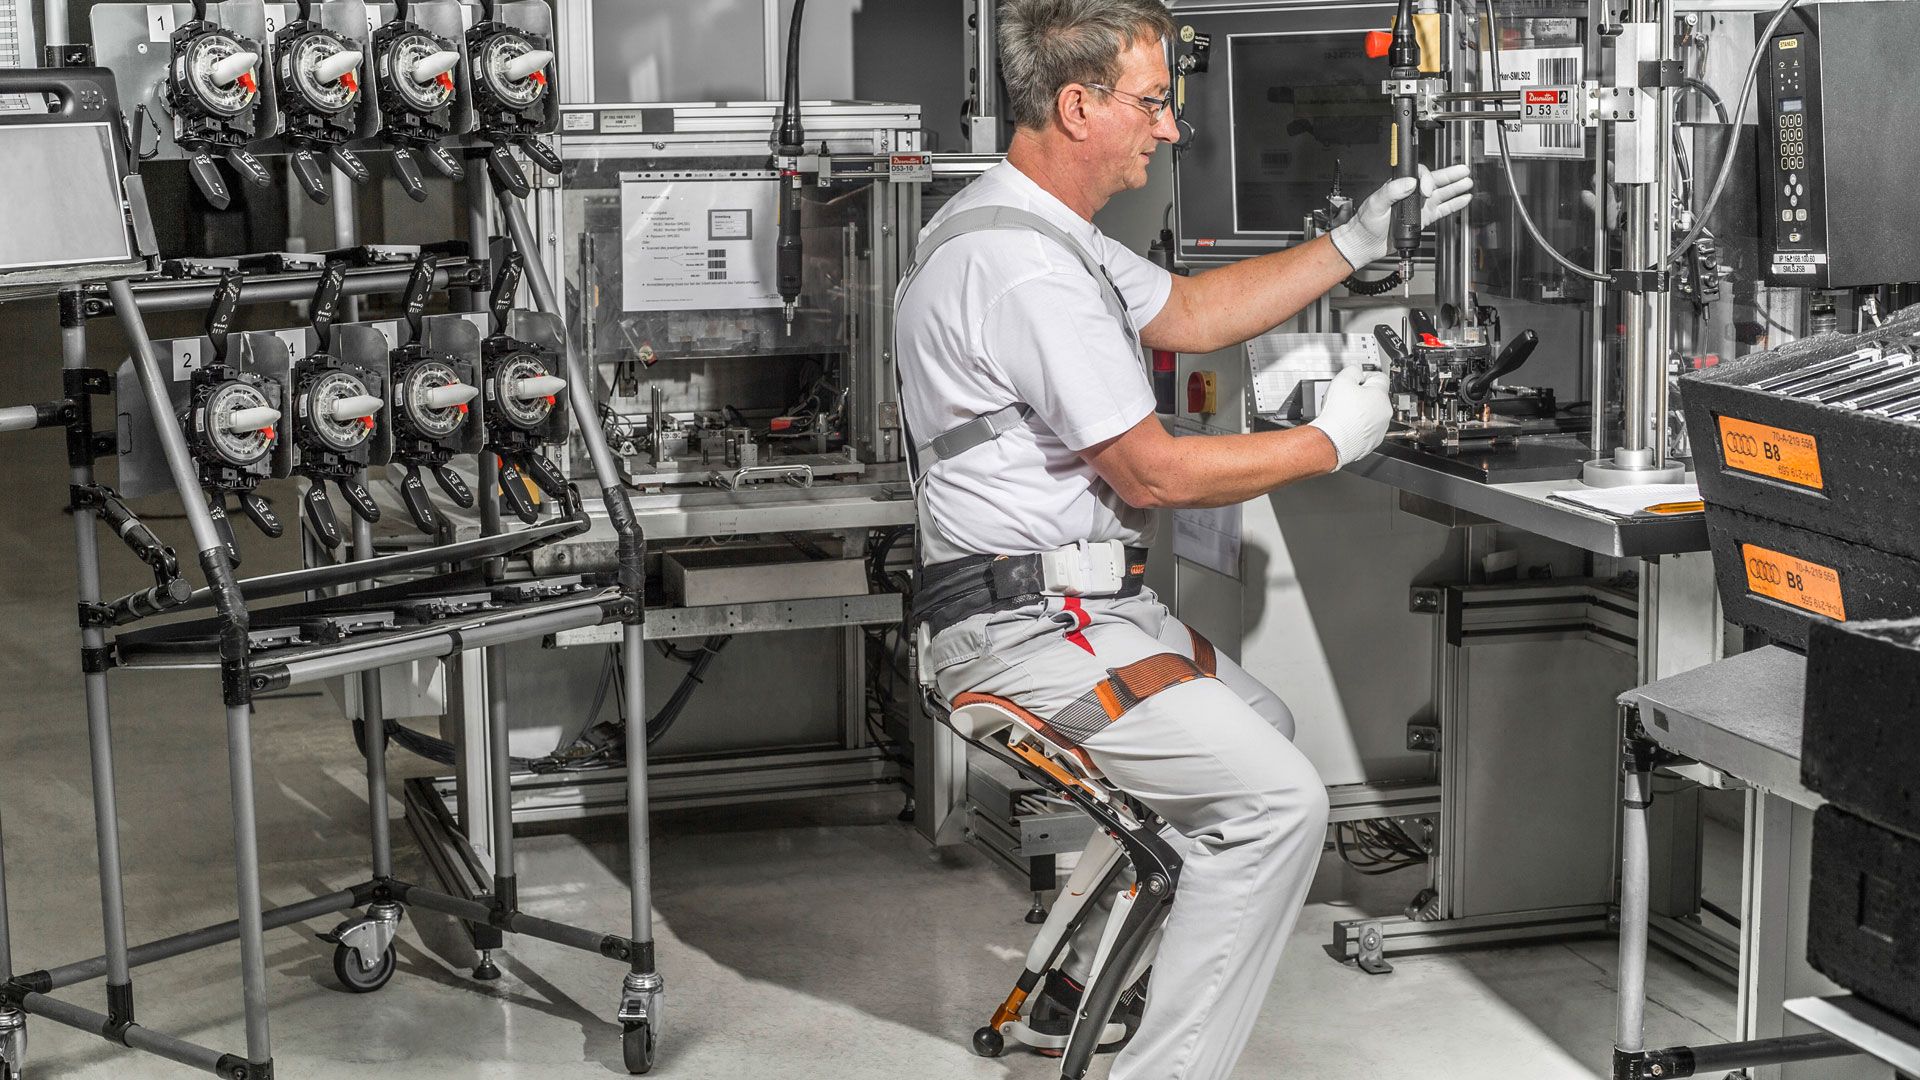 Chairless Chair: The chairless chair eases many assembly line activities. This high-tech, carbon-fiber construction allows Audi employees to sit and work without a chair. At the same time, it improves their posture and reduces physical strain on their legs and feet.